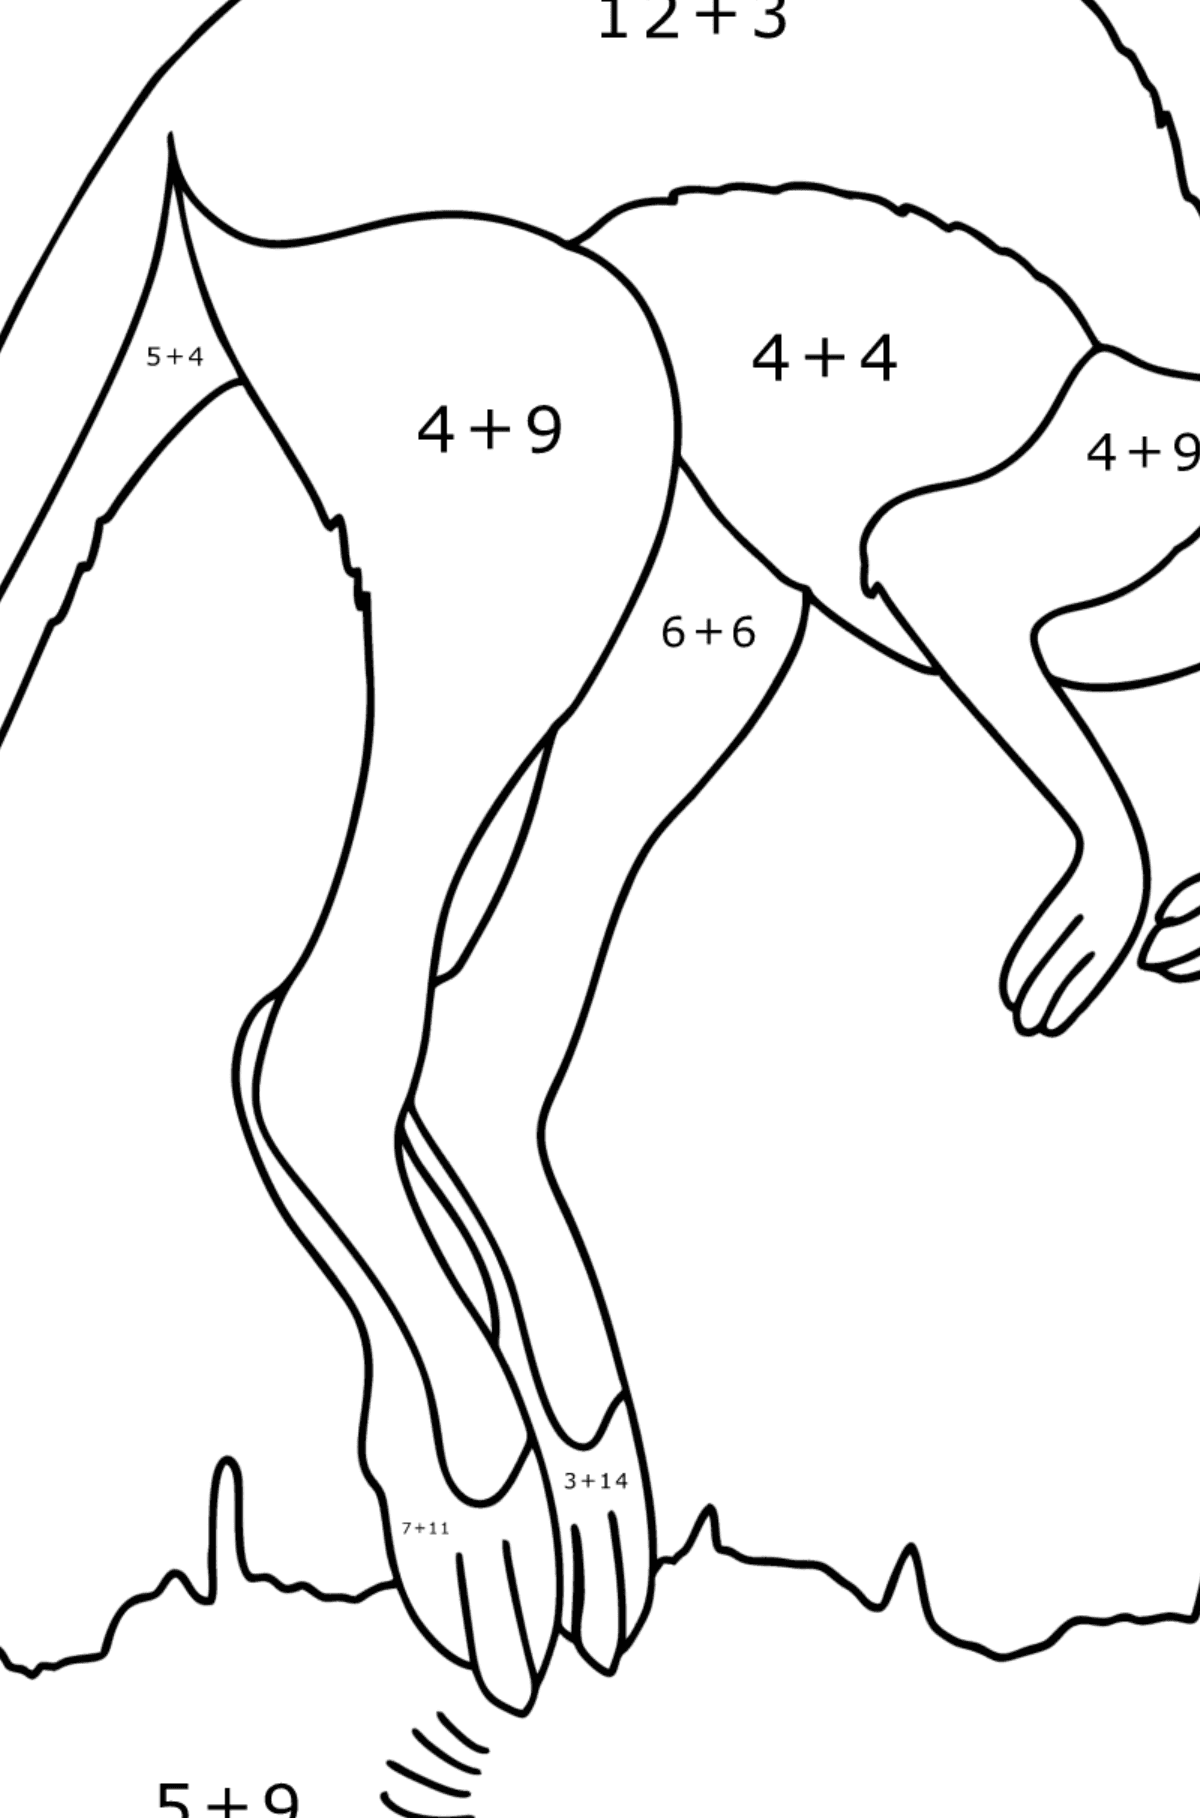 Jumping Kangaroo coloring page - Math Coloring - Addition for Kids